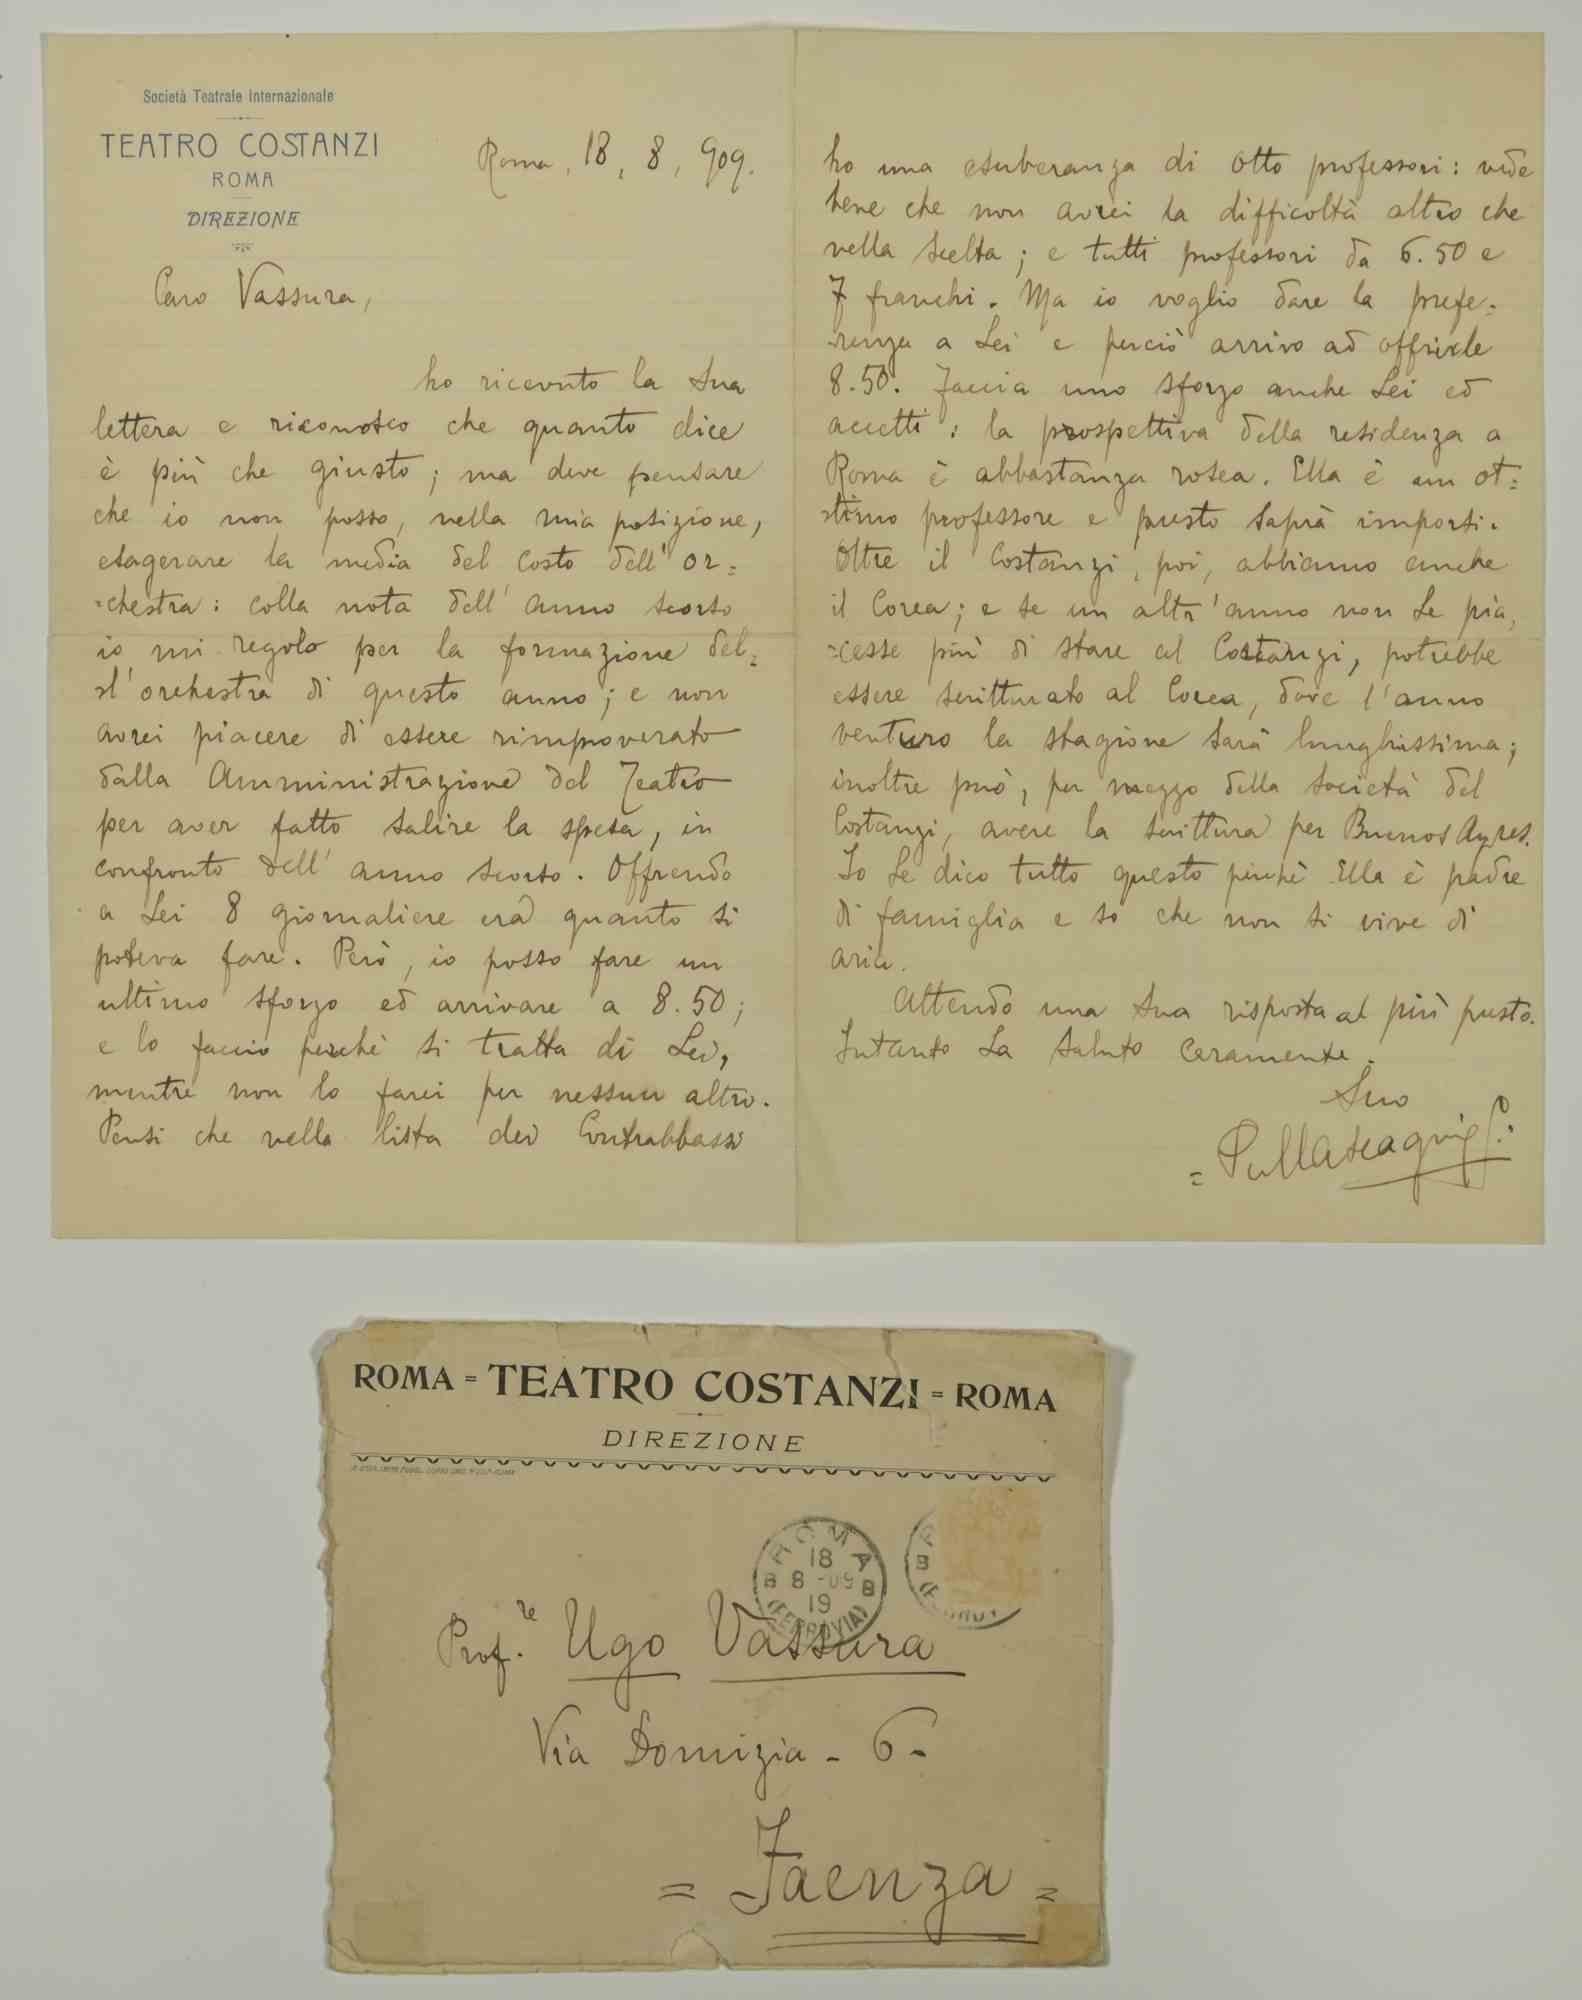 Beautiful L.A.F. (signed autograph letter) of two handwritten pages, made by Pietro Mascagni on 18-8-1909 on the headed paper of the

Teatro Costanzi in Rome and addressed to Prof. Ugo Vassura. The great composer tries to convince Prof. Vassura to